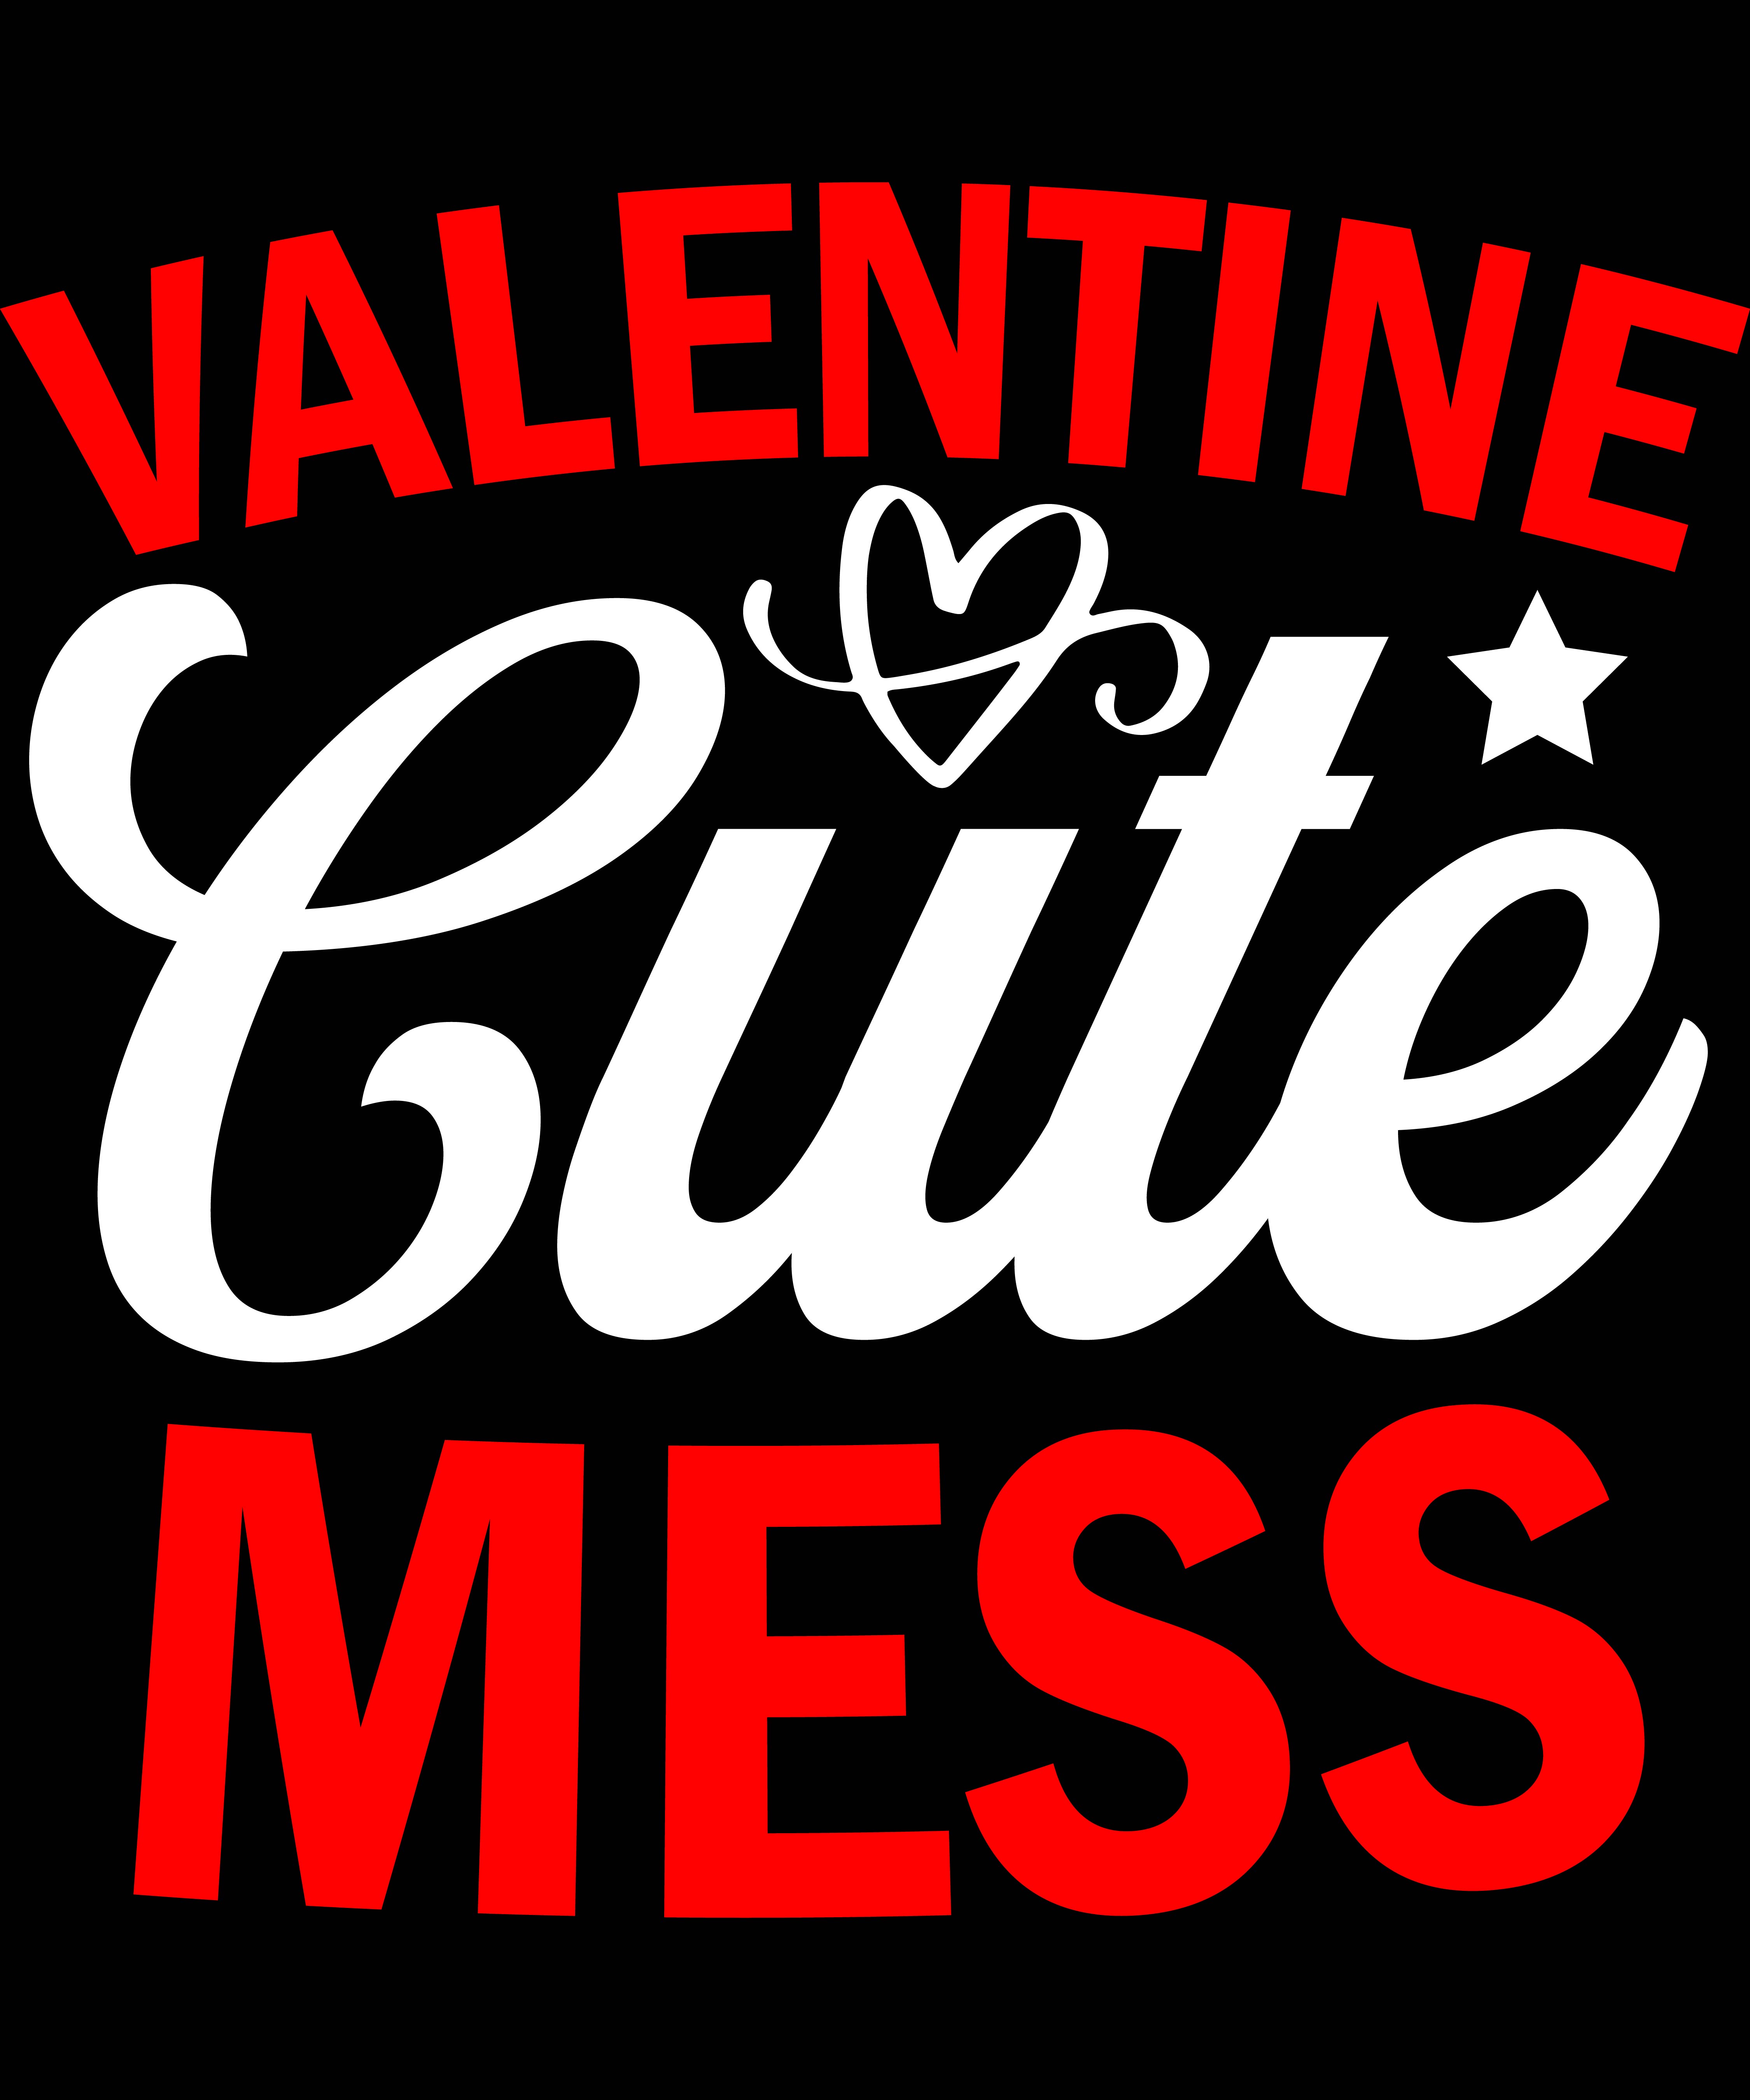 Valentine cute mess - quote for t-shirt design.